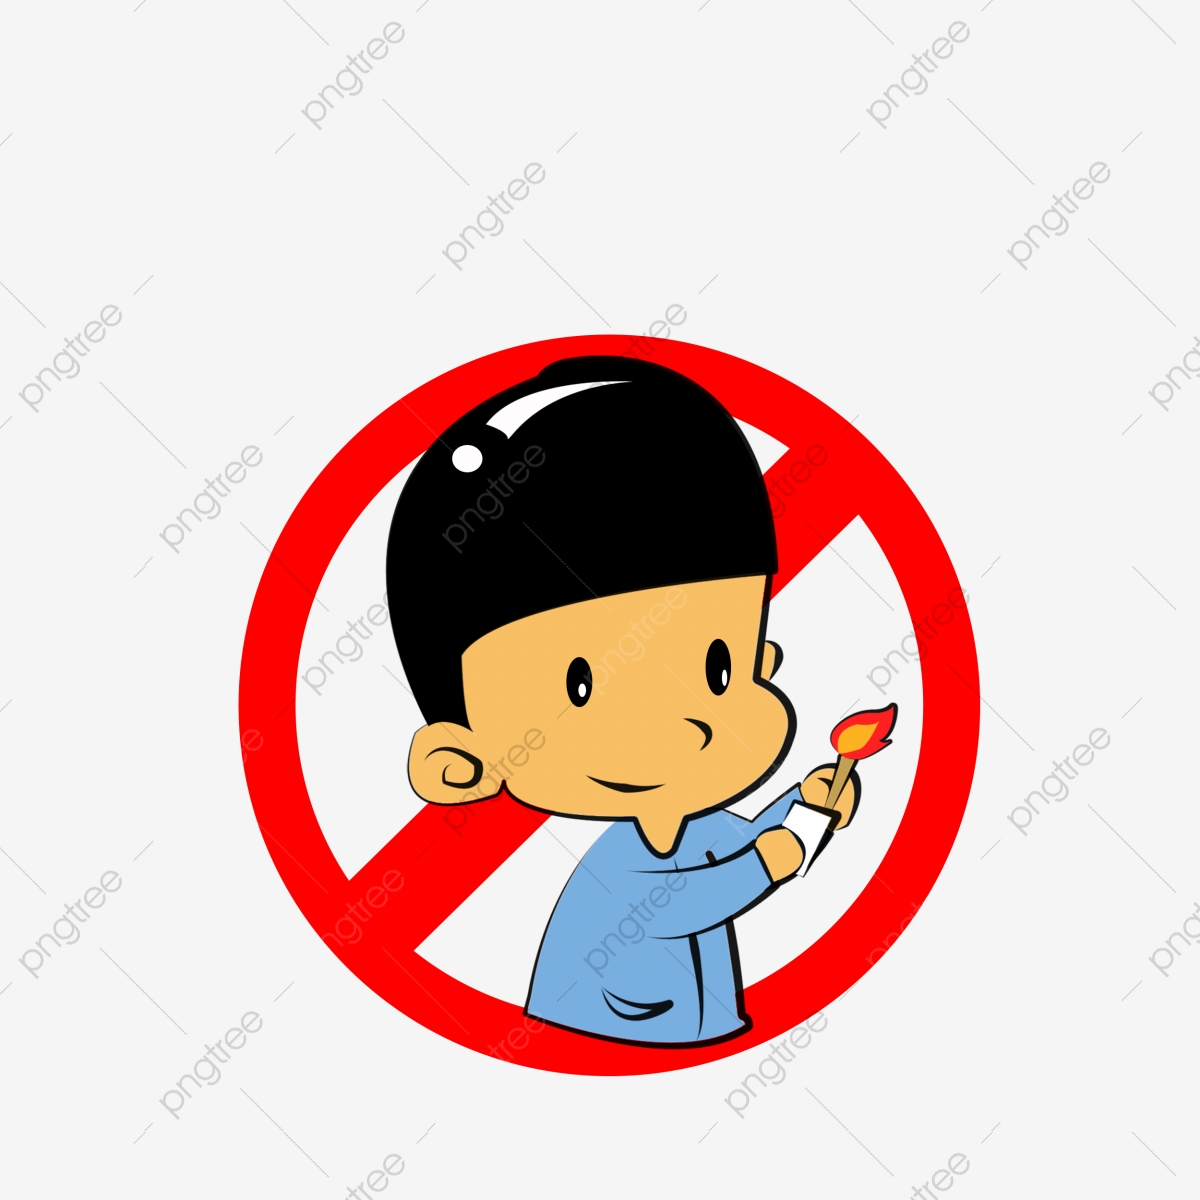 safe clipart safety education